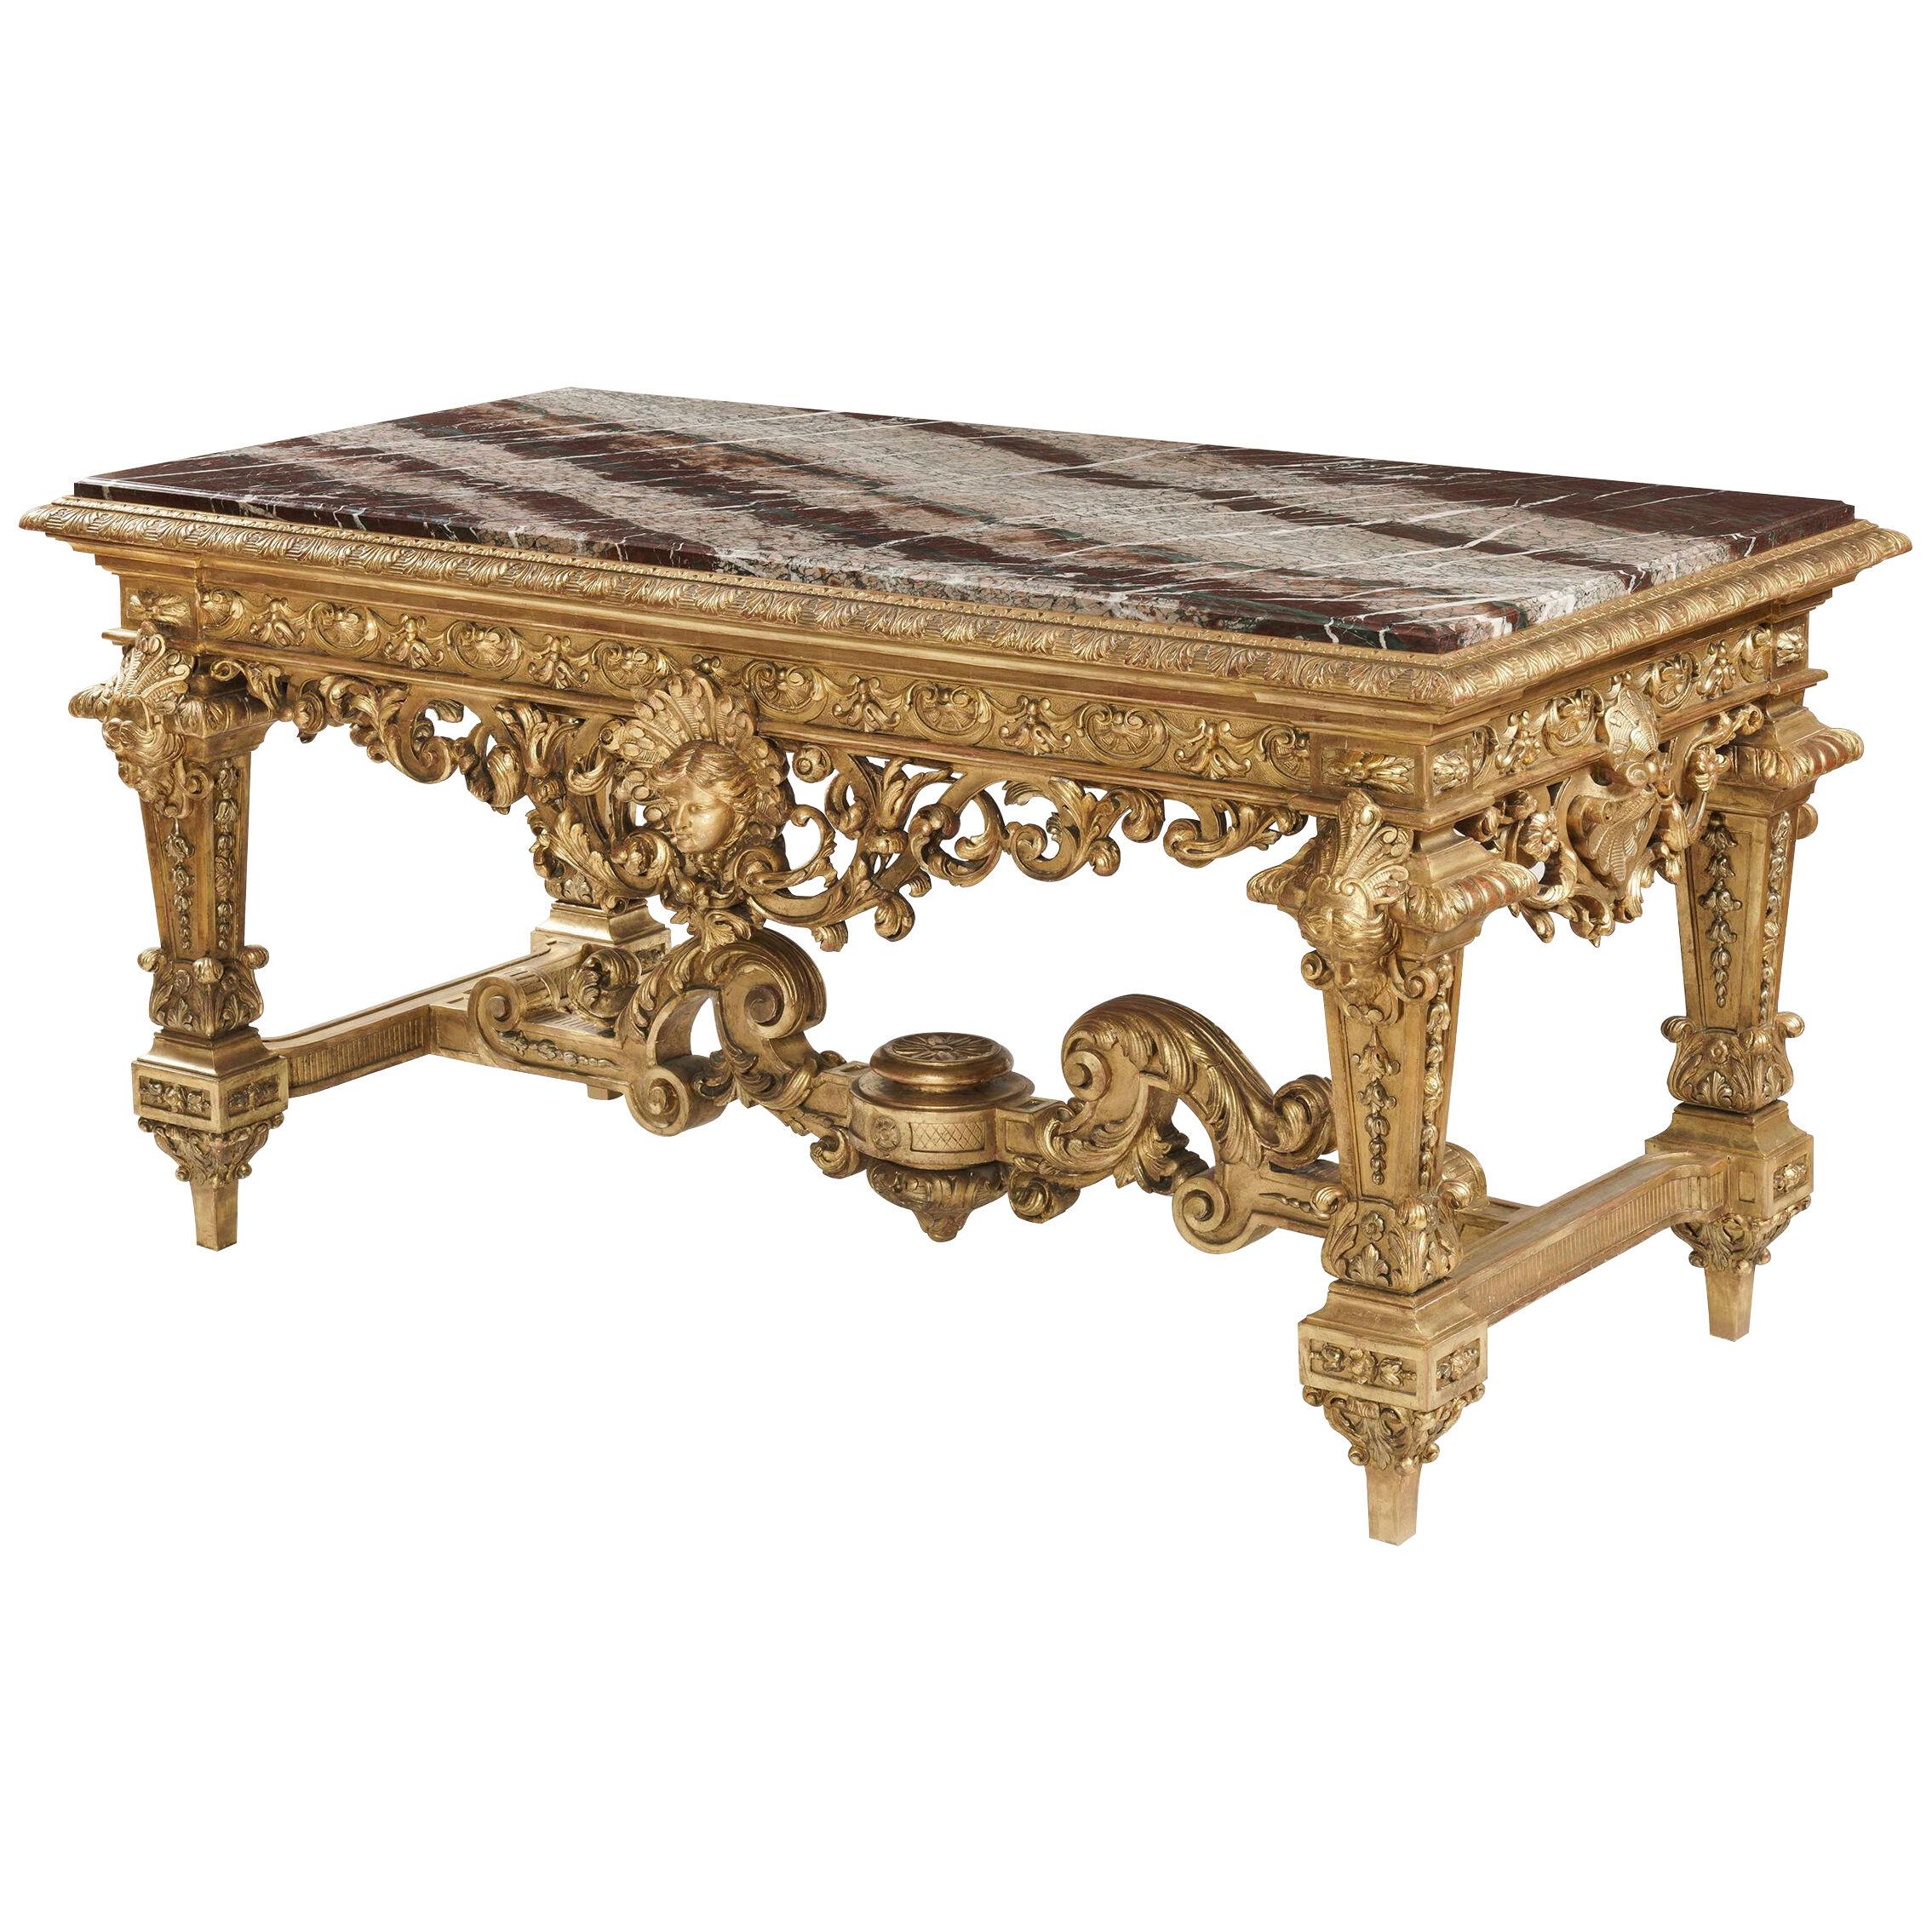 19th Century Giltwood Centre Table in the Louis XIV Style